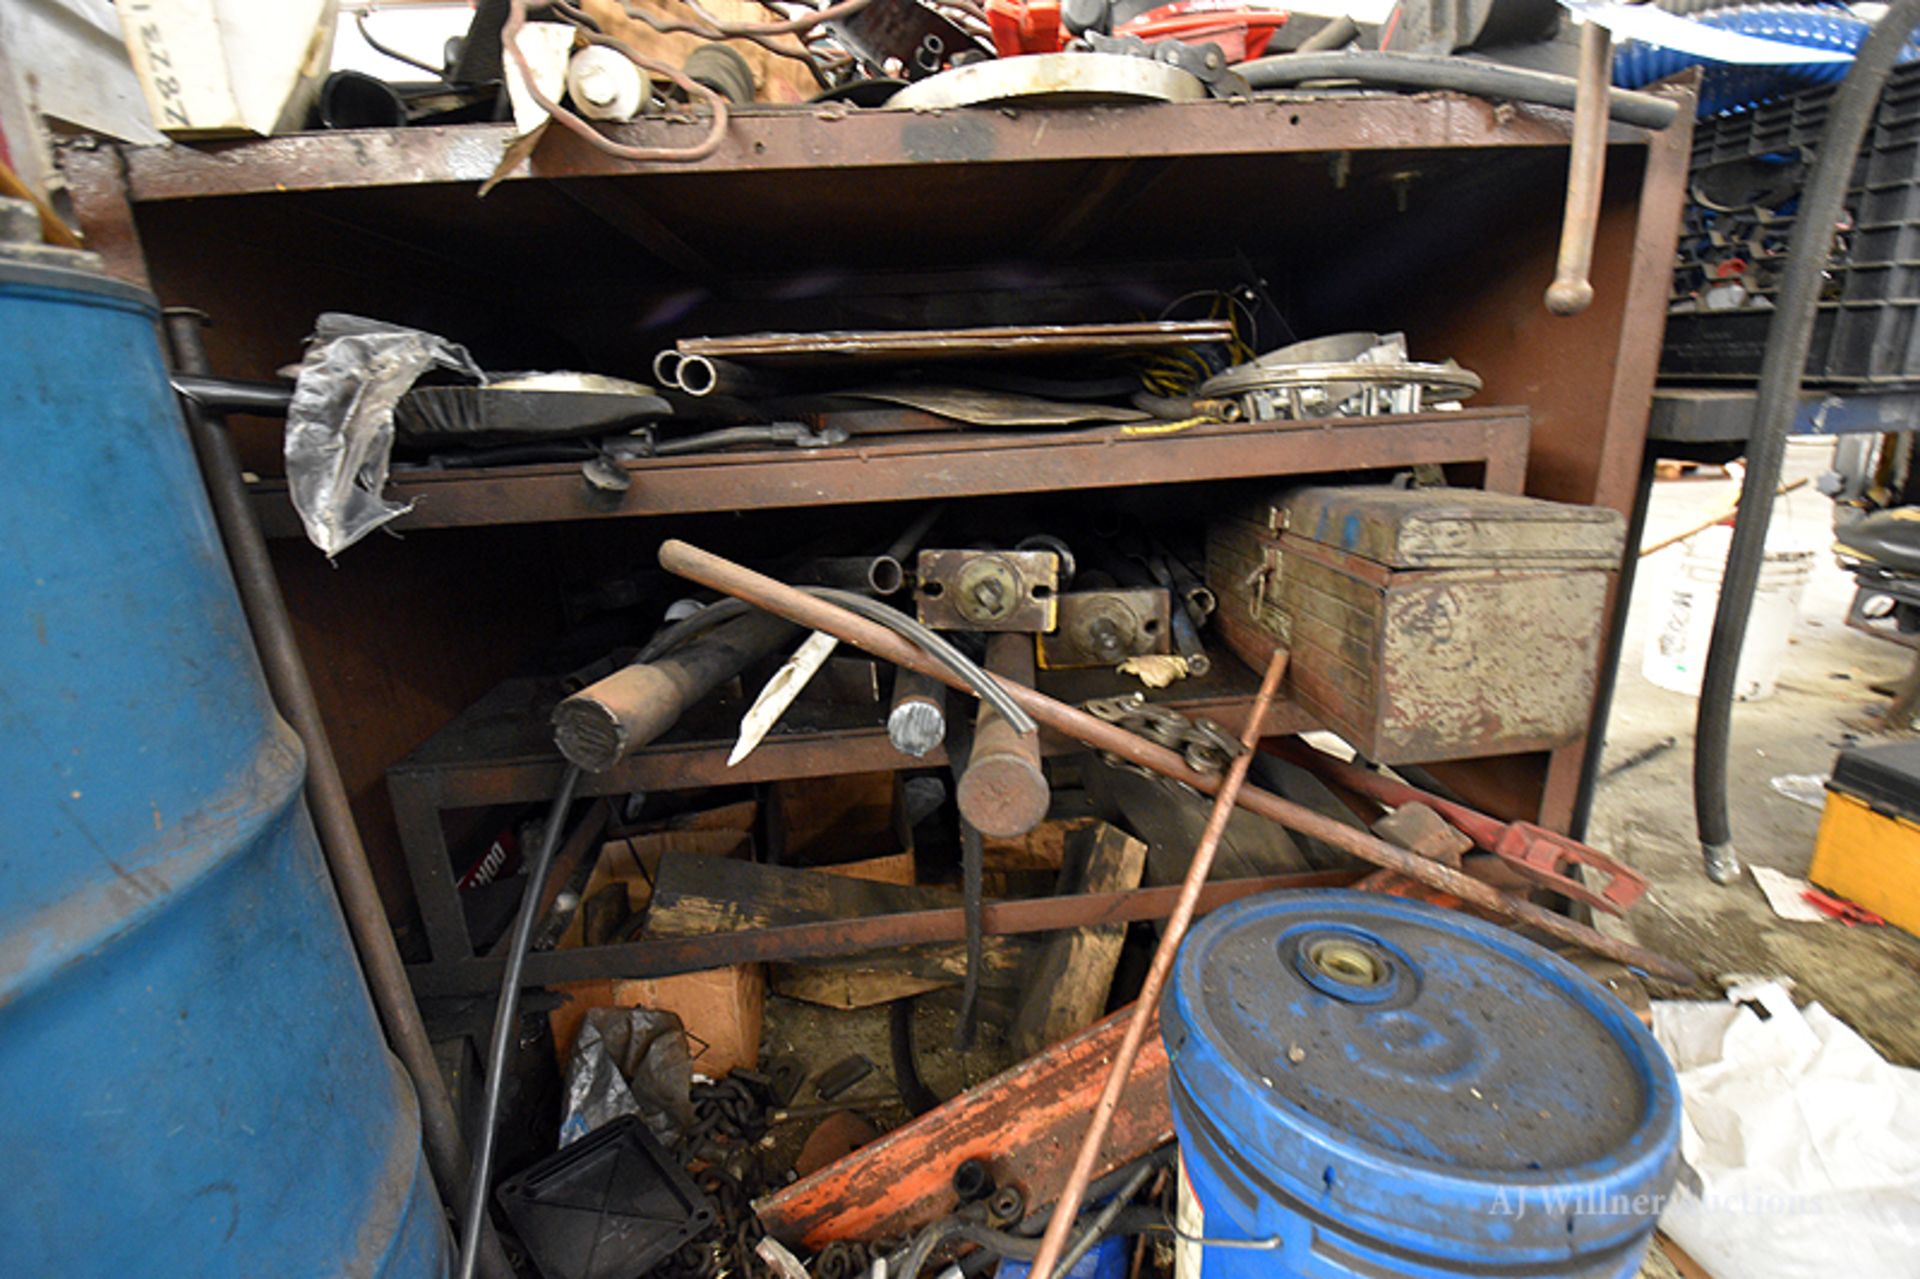 Contents of Work Surfaces and Tool Boxes - Image 2 of 4